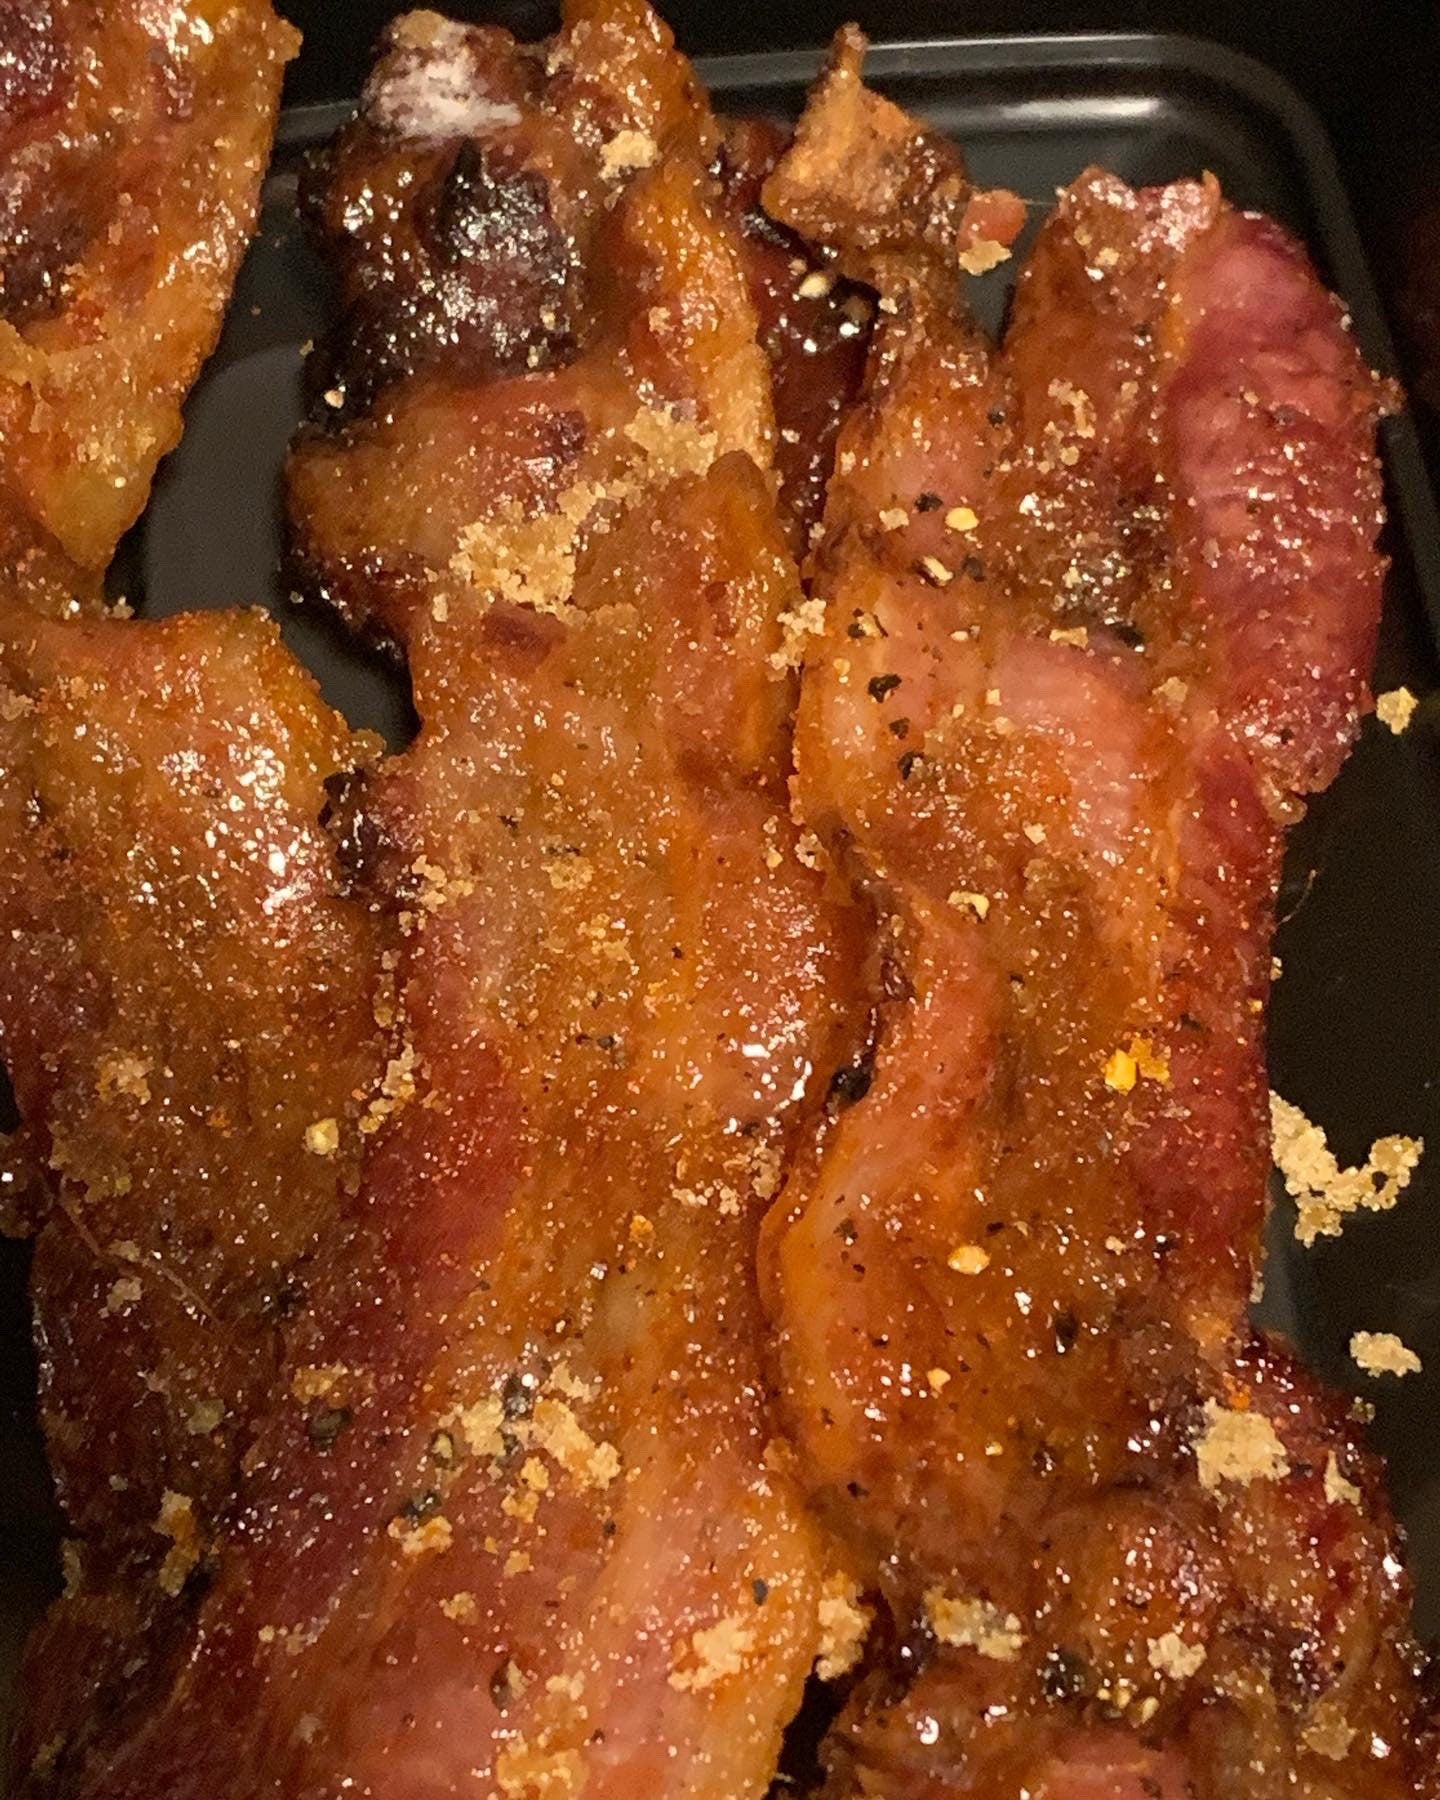 Candied Bacon - 0 NET CARBS